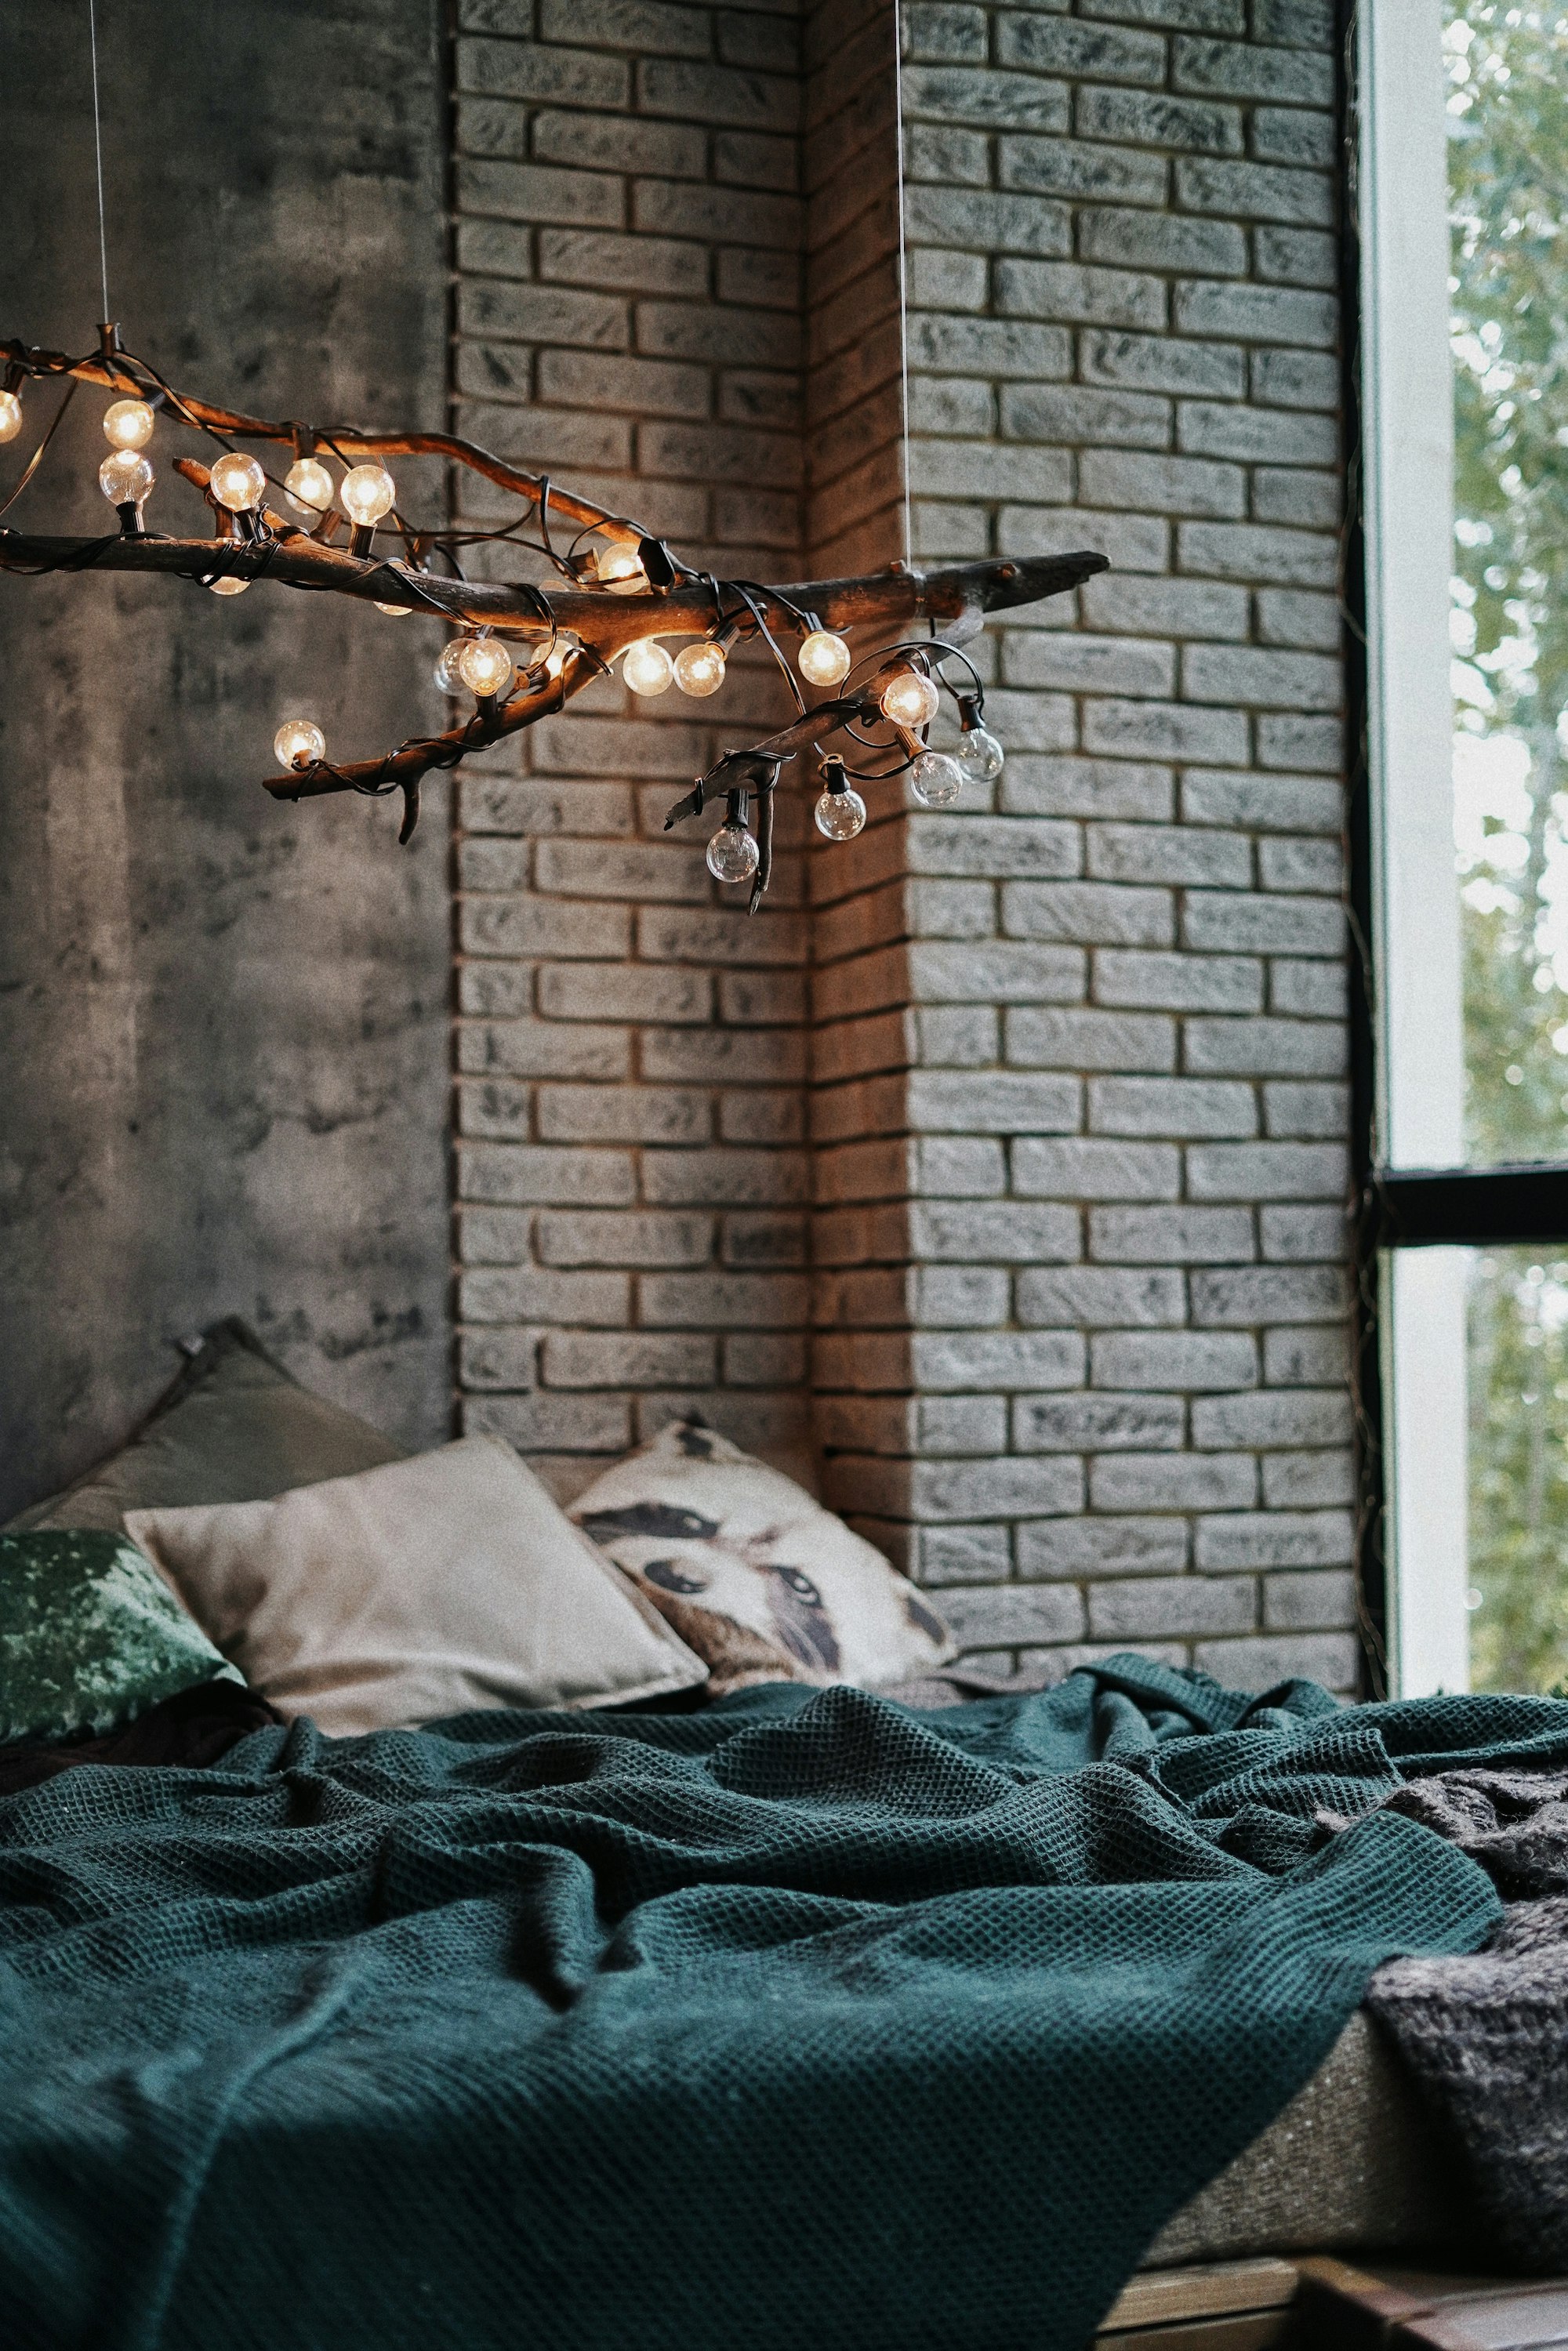 Fairy lights draped across a large stick to create a moody atmosphere. The bedroom has dark white brick walls, large windows, and a bed. The bed has a deep blue color throw to add a pop of color.